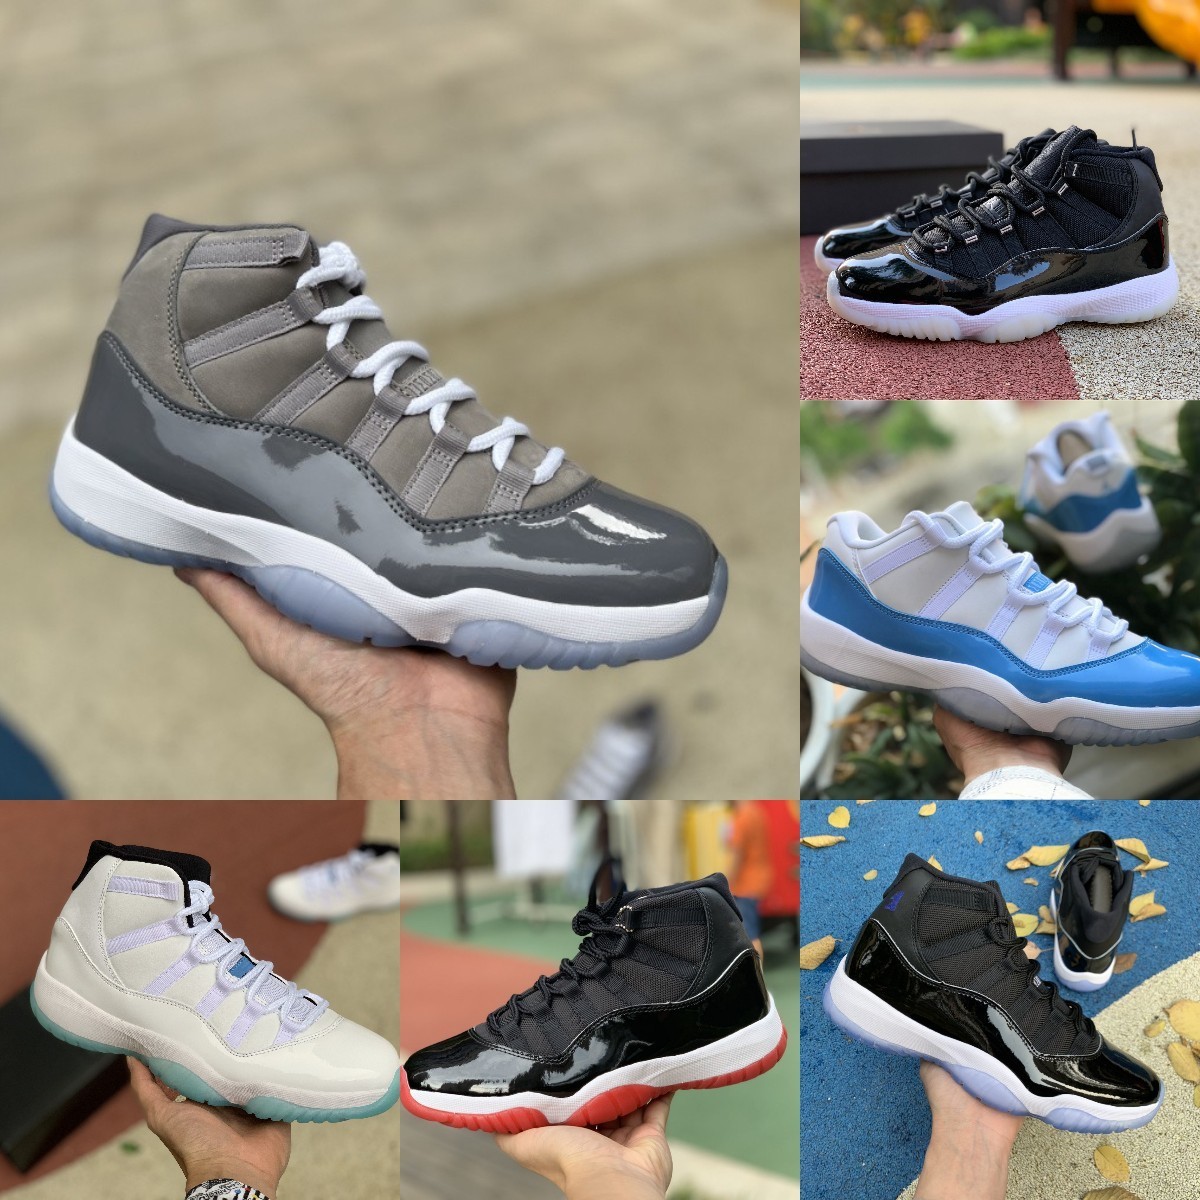 

COOL GREY Jubilee Bred 11 11s High Basketball Shoes Jumpman Legend Blue 25th Anniversary Space Jam Gamma Blue Easter Concord 45 Low Designer Trainer Sneakers Brand, Please contact us